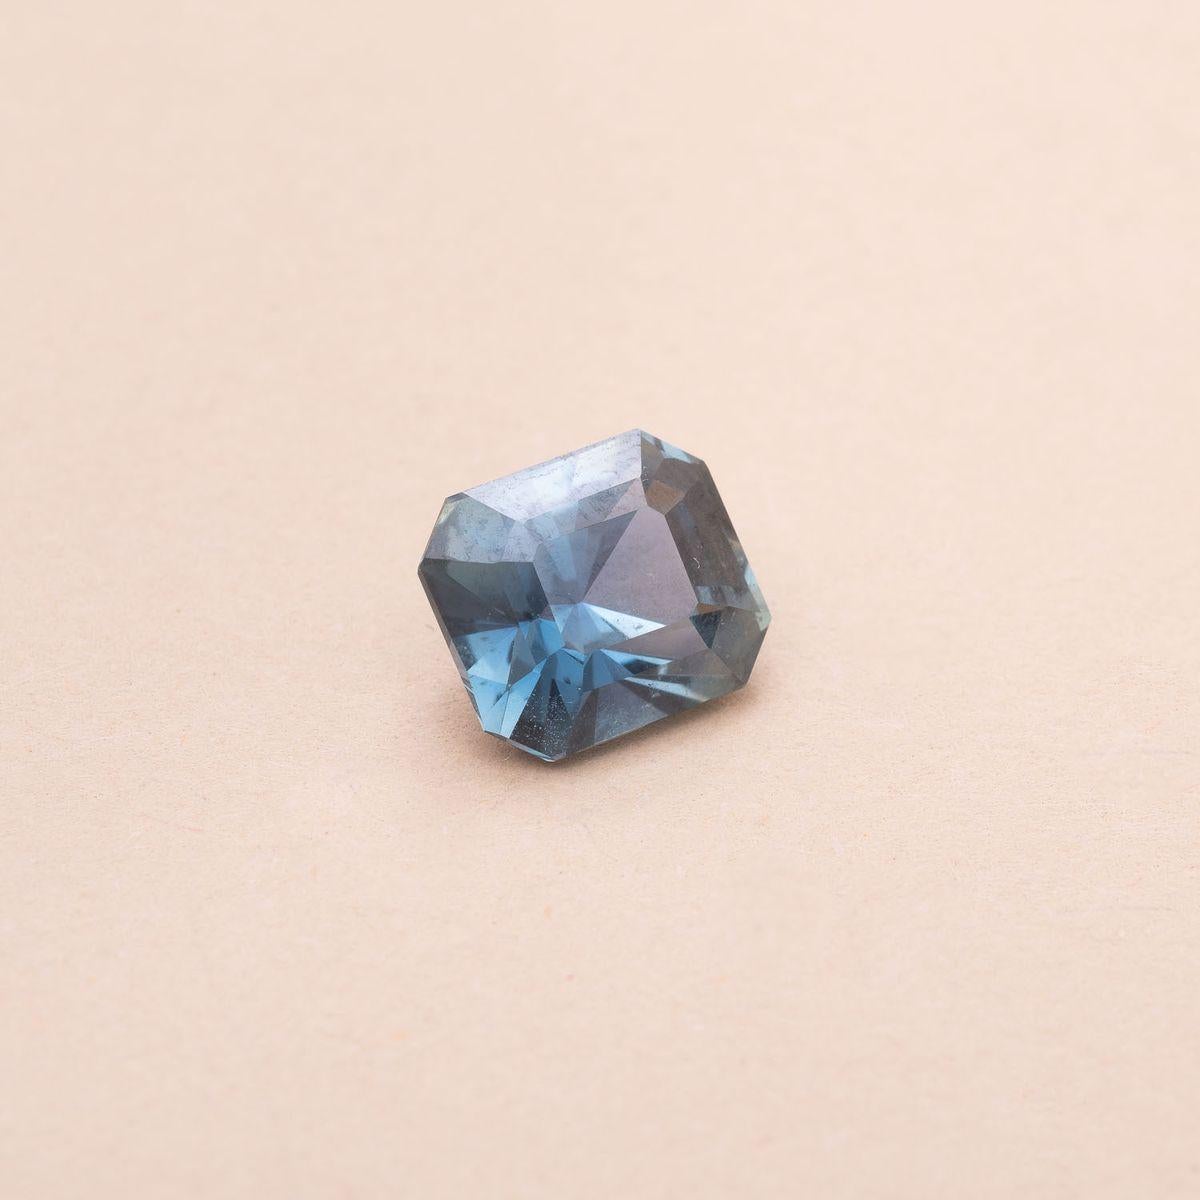 3.59 carats step-cut or emerald-cut sapphire
Gorgeous blue green color
Unheated 
Origin : Ceylan Madagascar 
Dimensions : 87 x 76 x 56 mm 

Delivered with the Laboratoire Gem Paris certificate attesting its